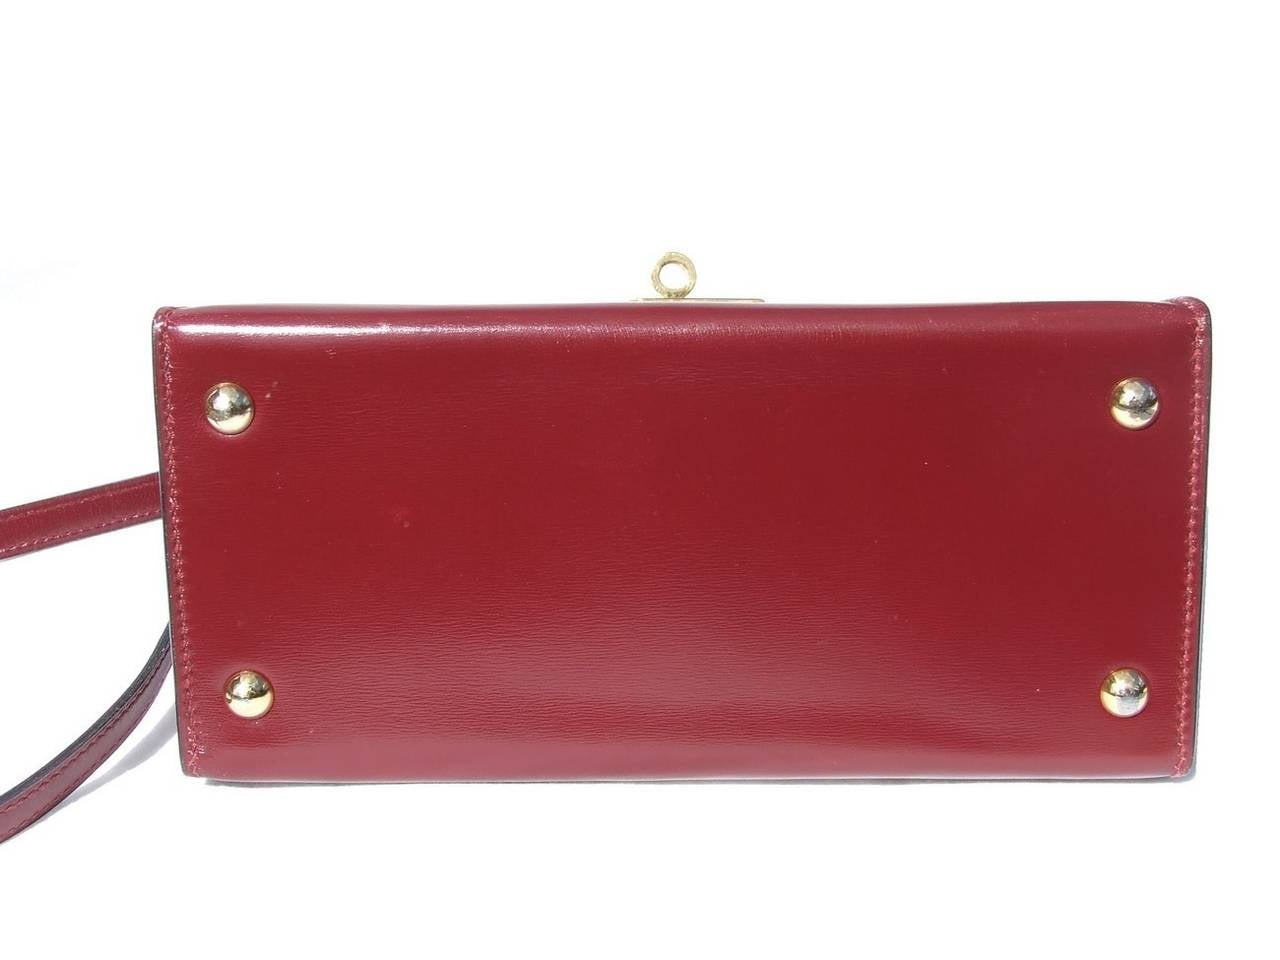 Authentic Hermes Mini Kelly 20 Bag Sellier Rouge H at 1stdibs